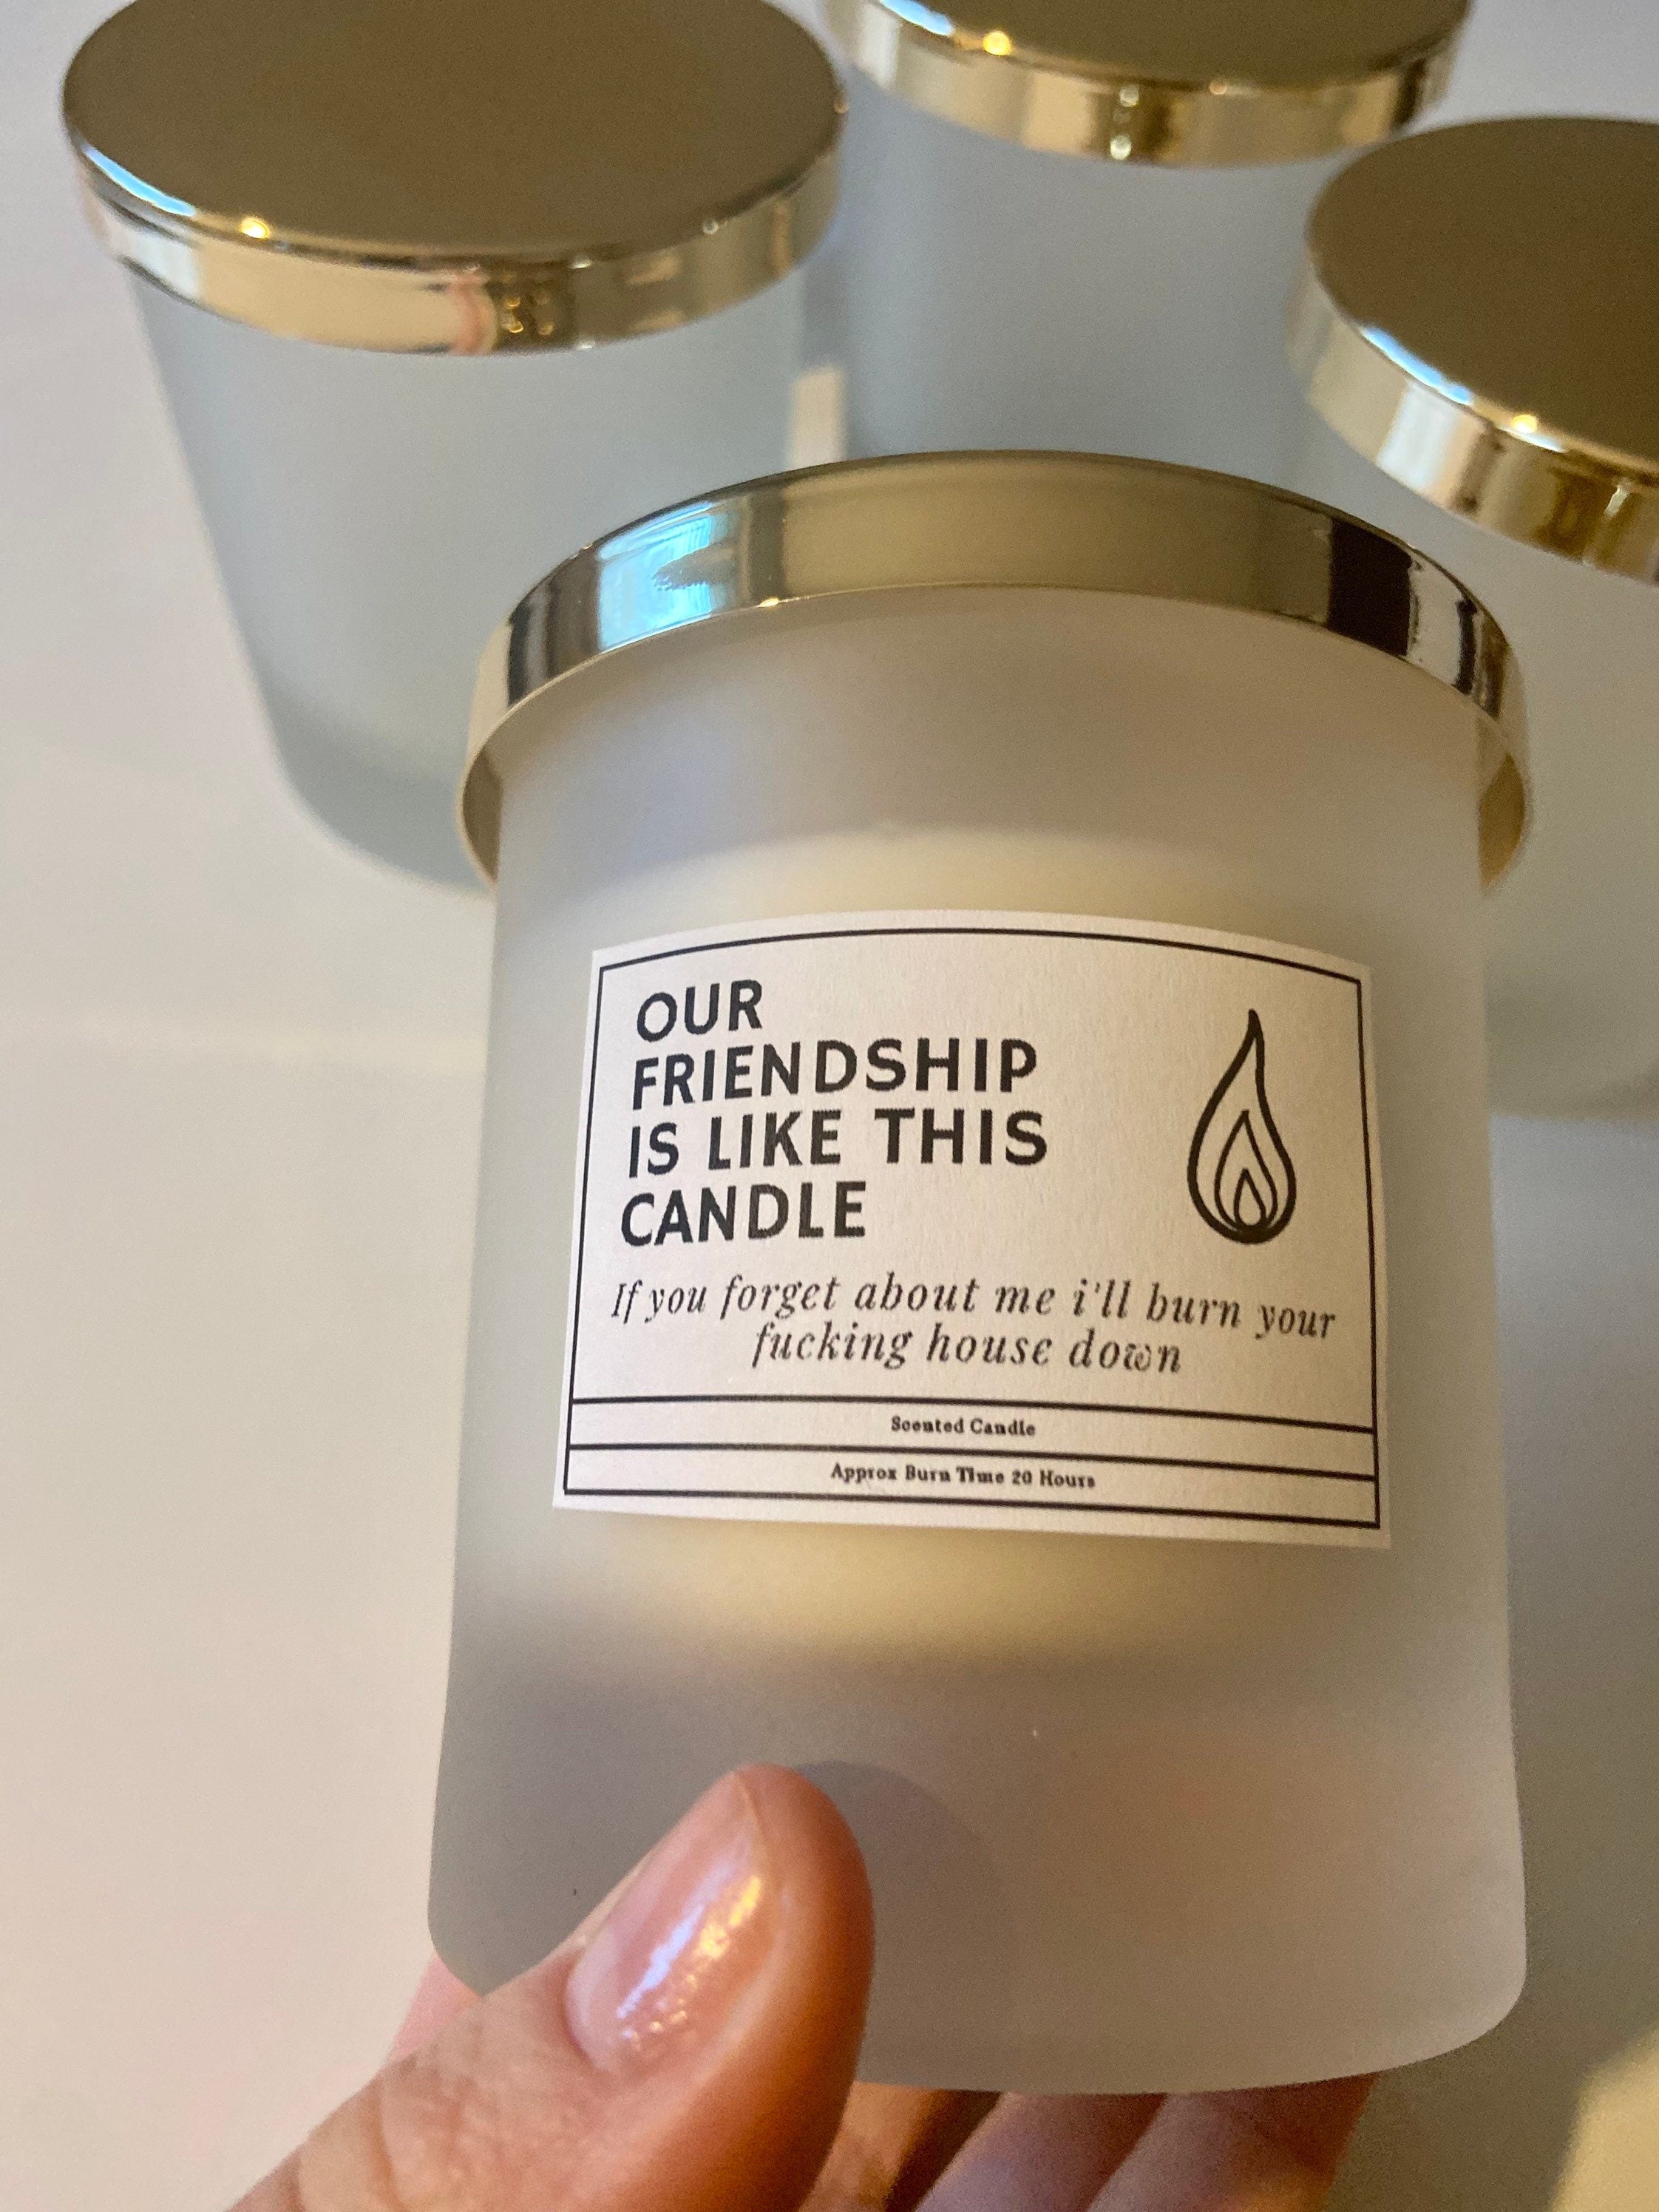 Funny Friendship Candle, our friendship is like this candle, forget about me and I'll burn your house down